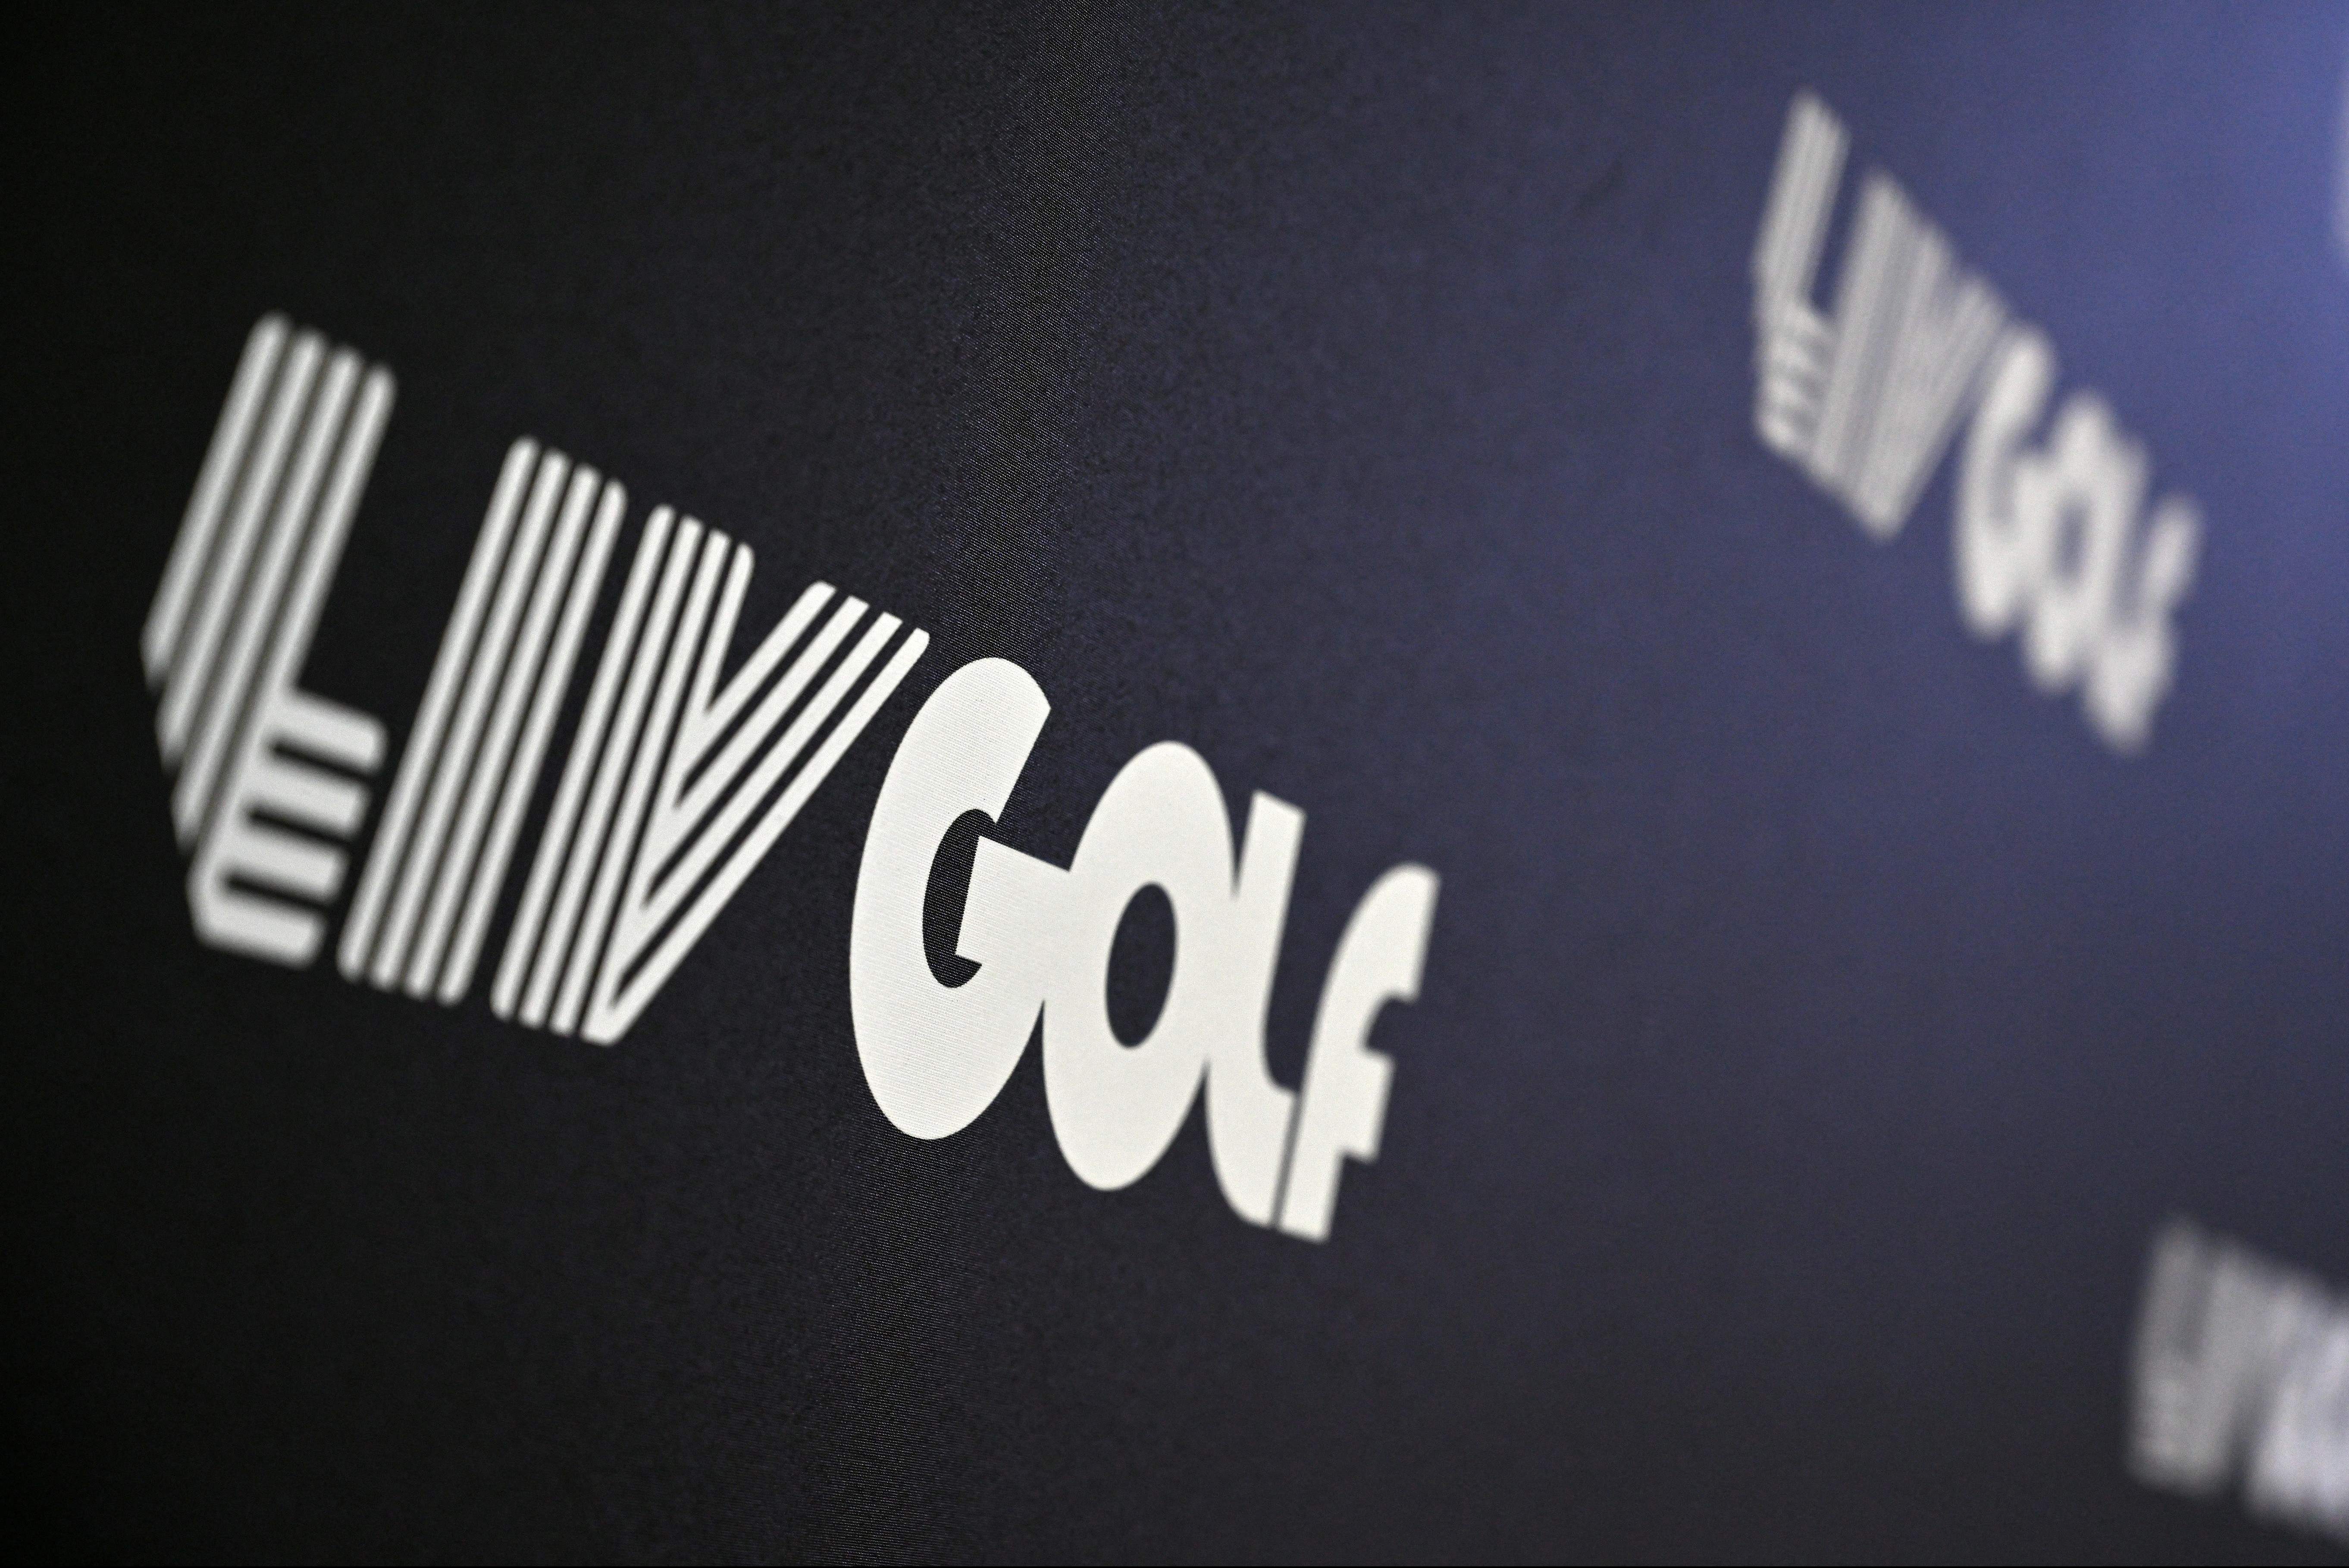 Branding for the forthcoming LIV Golf event at The Centurion Club outside London